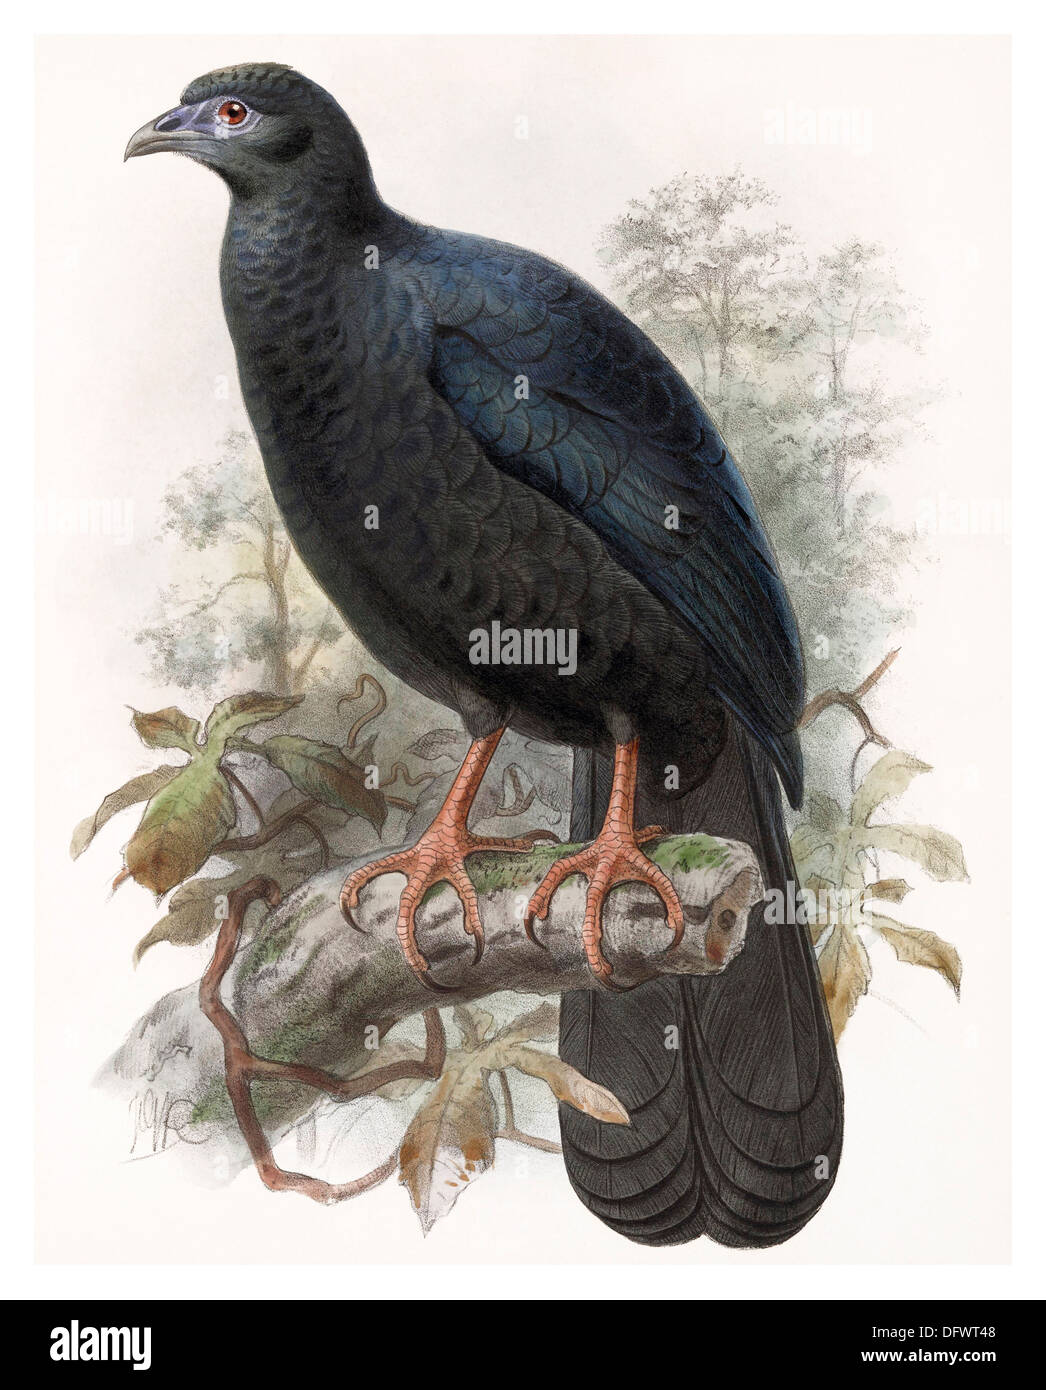 The Black Guan (Chamaepetes unicolor)  High resolution enhanced lithograph Stock Photo